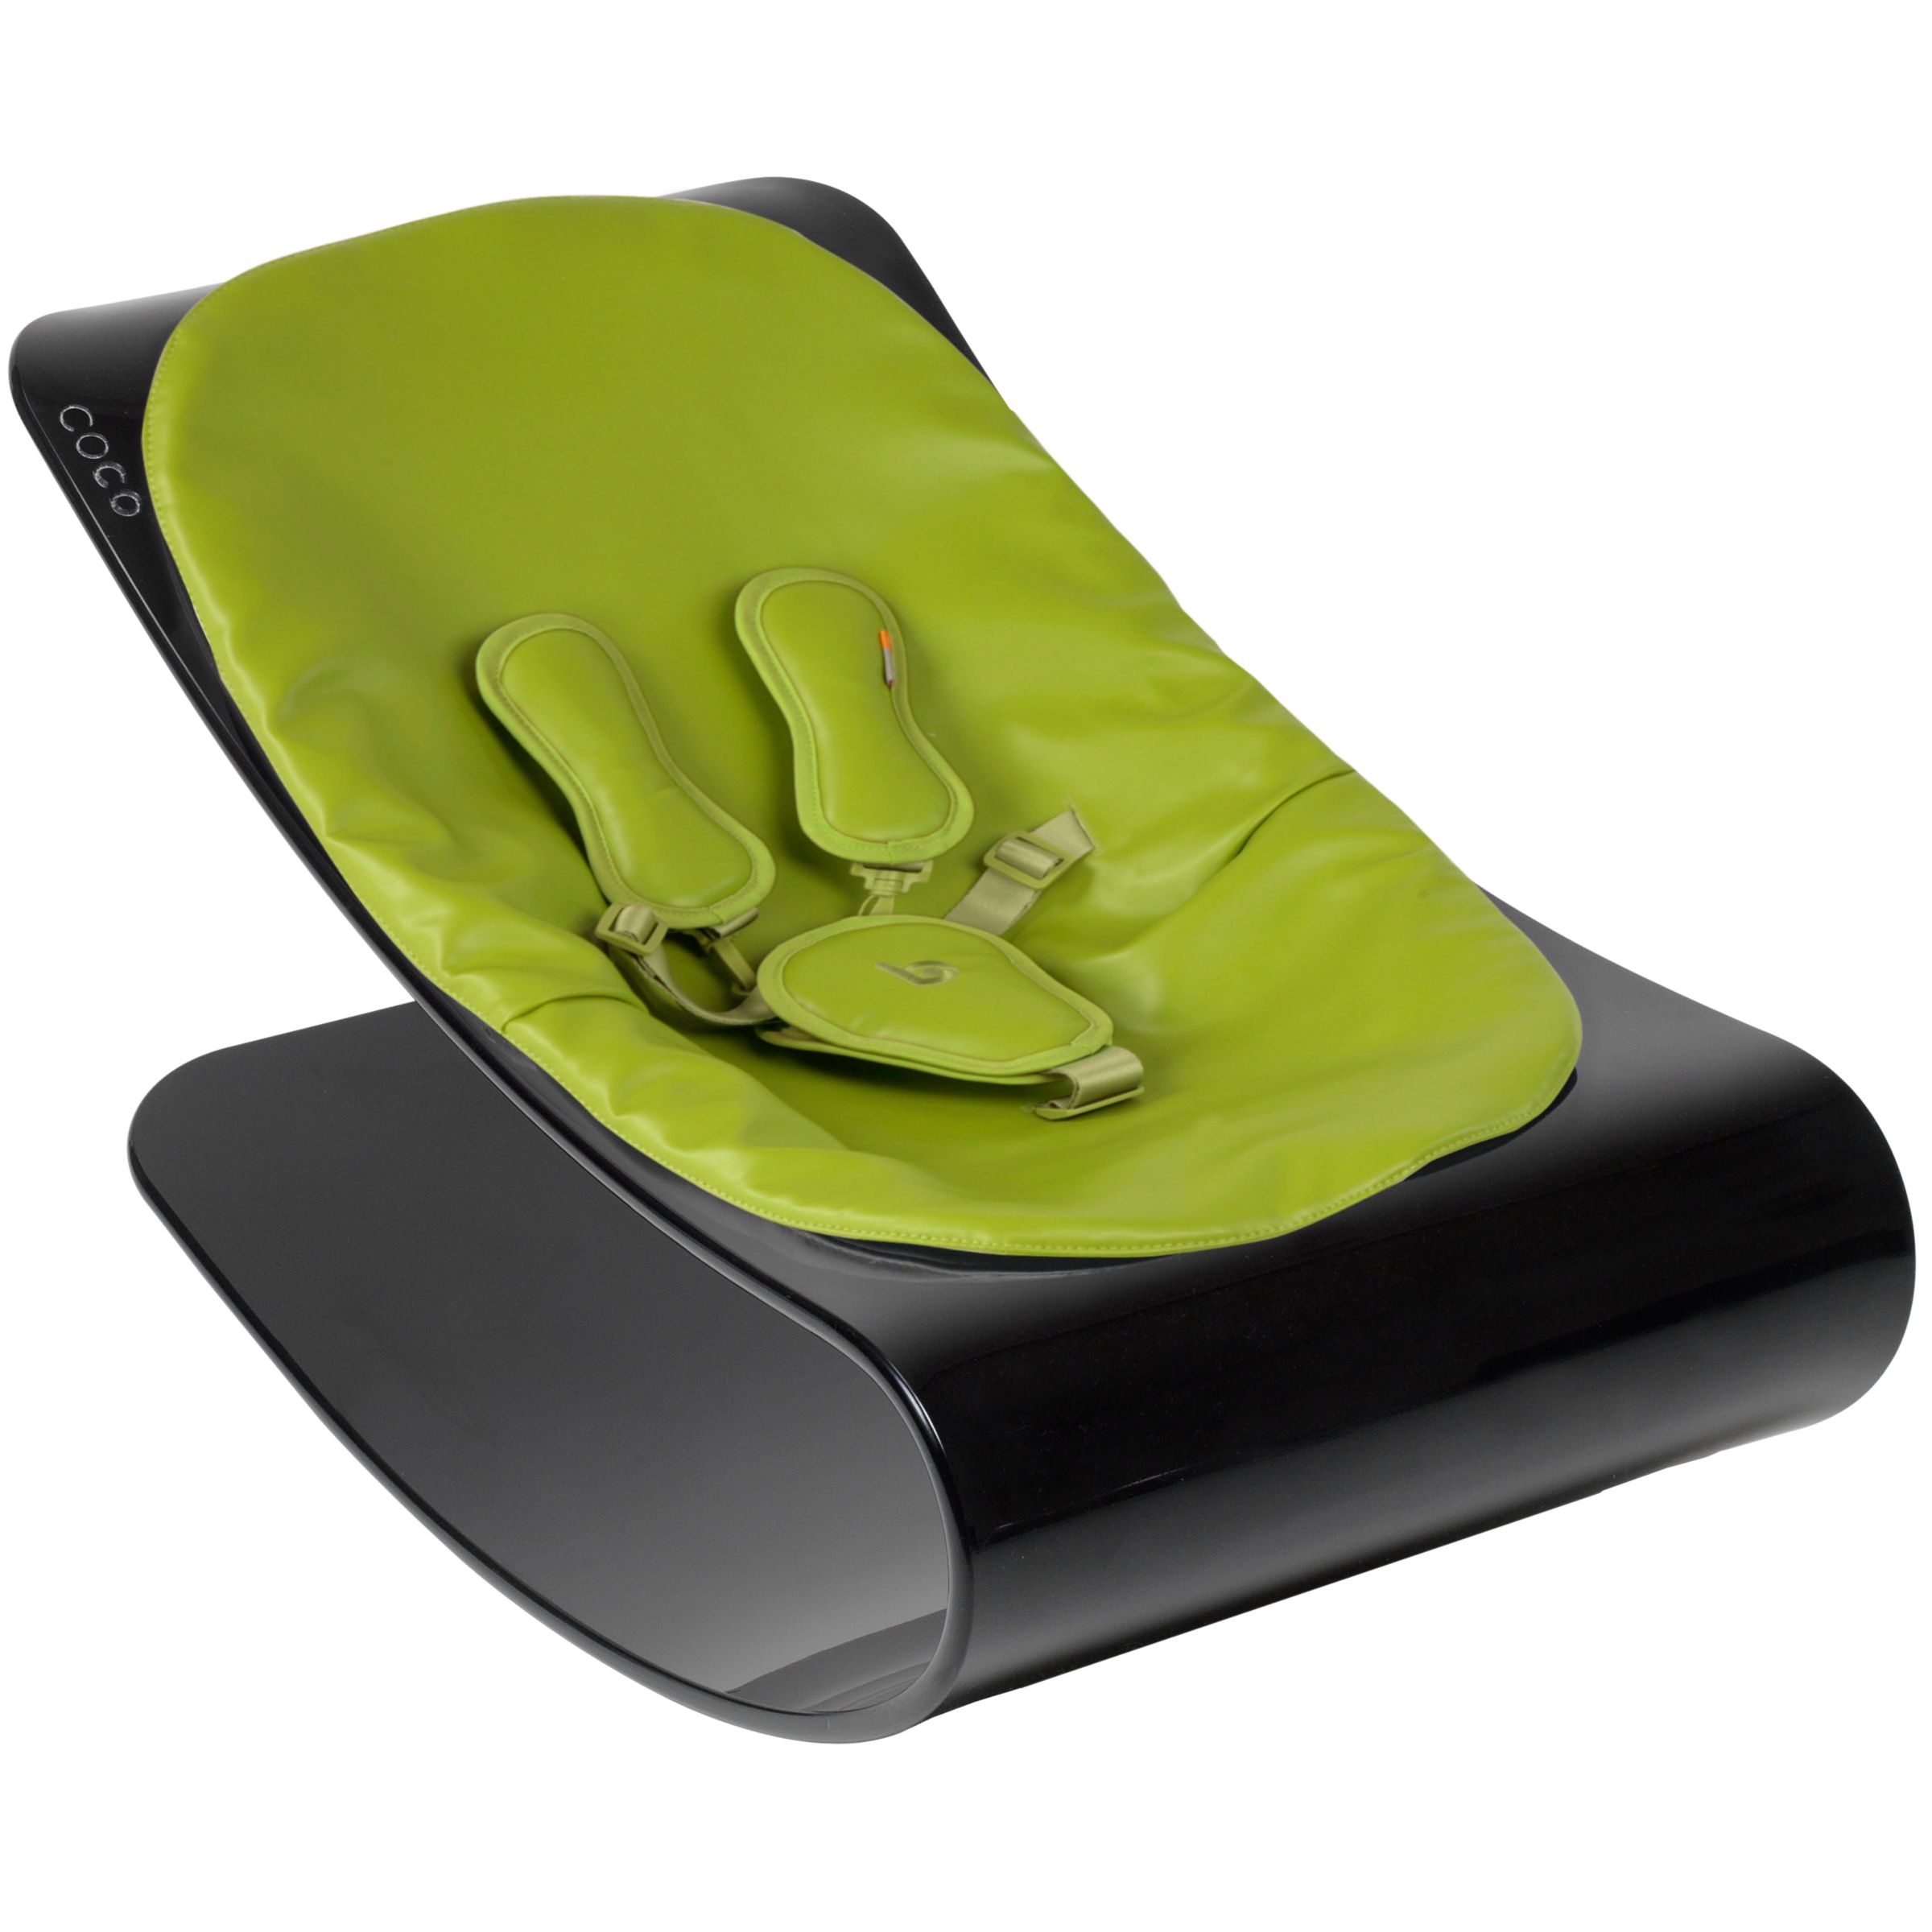 bloom Coco Plexistyle Baby Lounger, Ebony Black with Gala Green at John Lewis